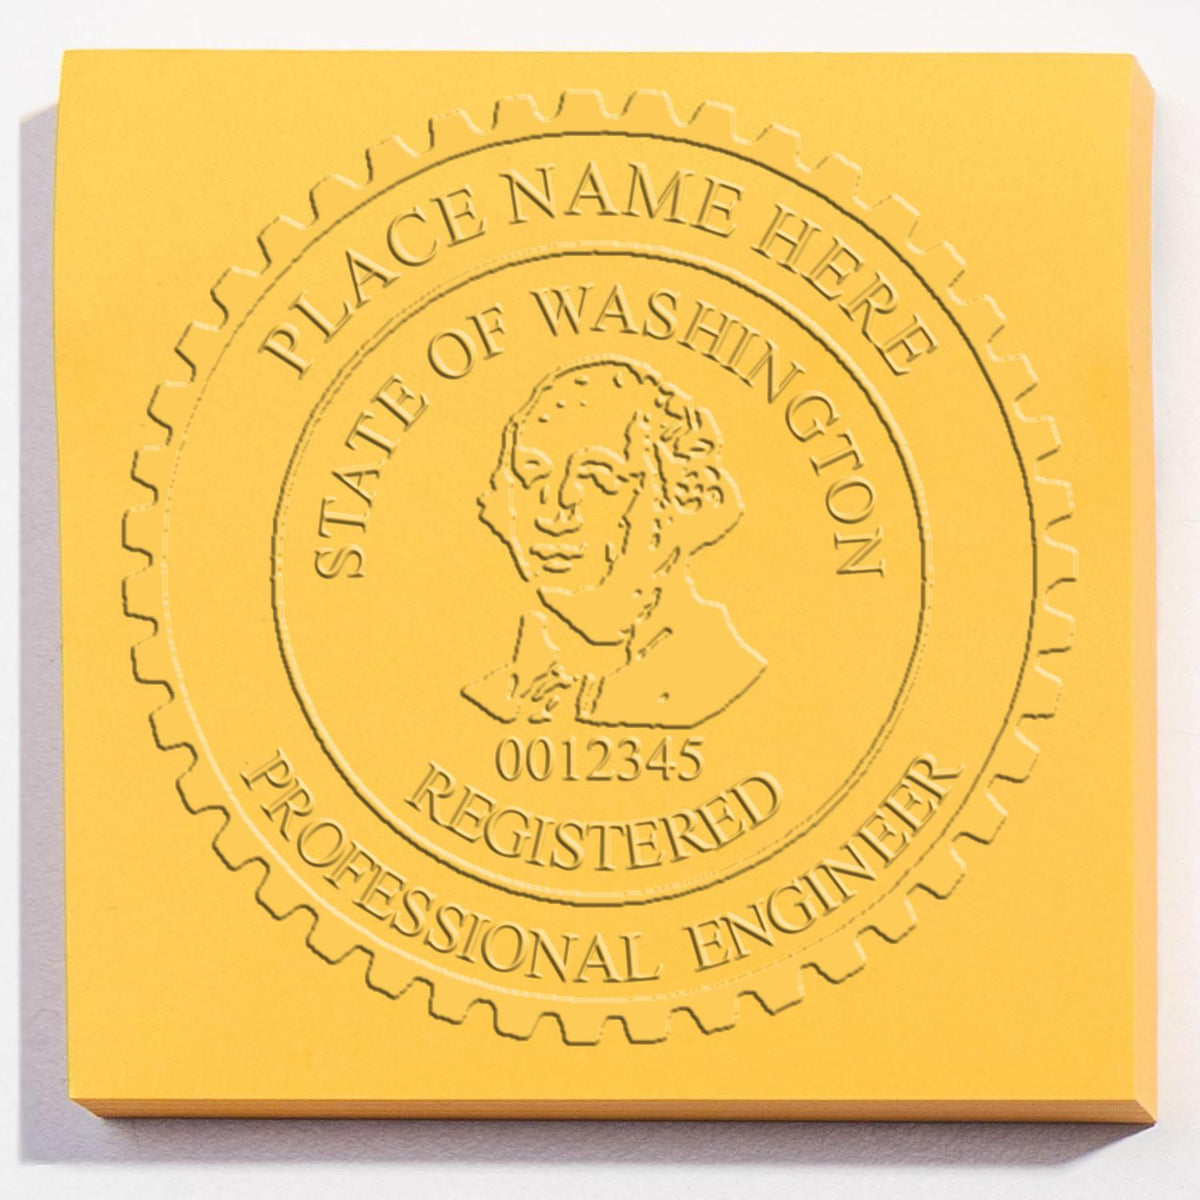 The Gift Washington Engineer Seal stamp impression comes to life with a crisp, detailed image stamped on paper - showcasing true professional quality.